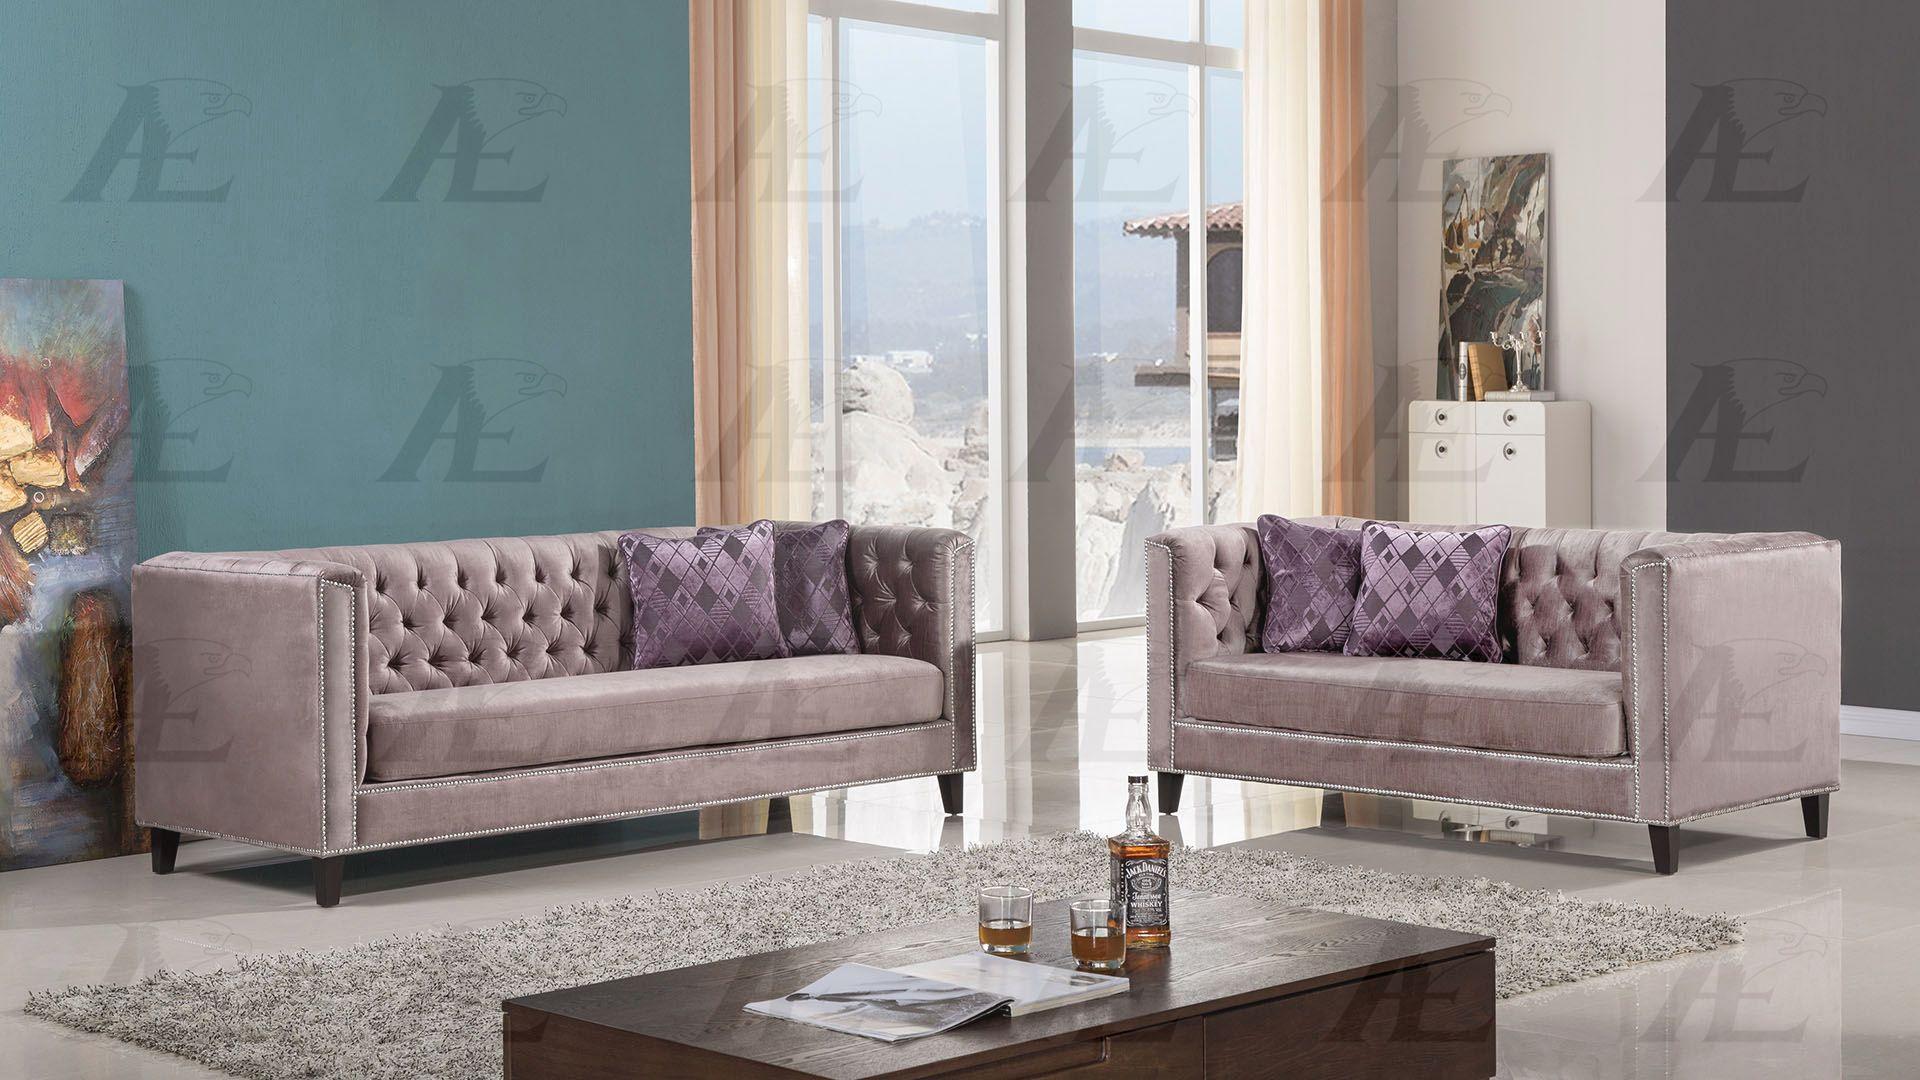 

    
American Eagle Furniture AE2373-DB Dusty Brown Fabric Sofa and Loveseat Set 2Pcs Contemporary
